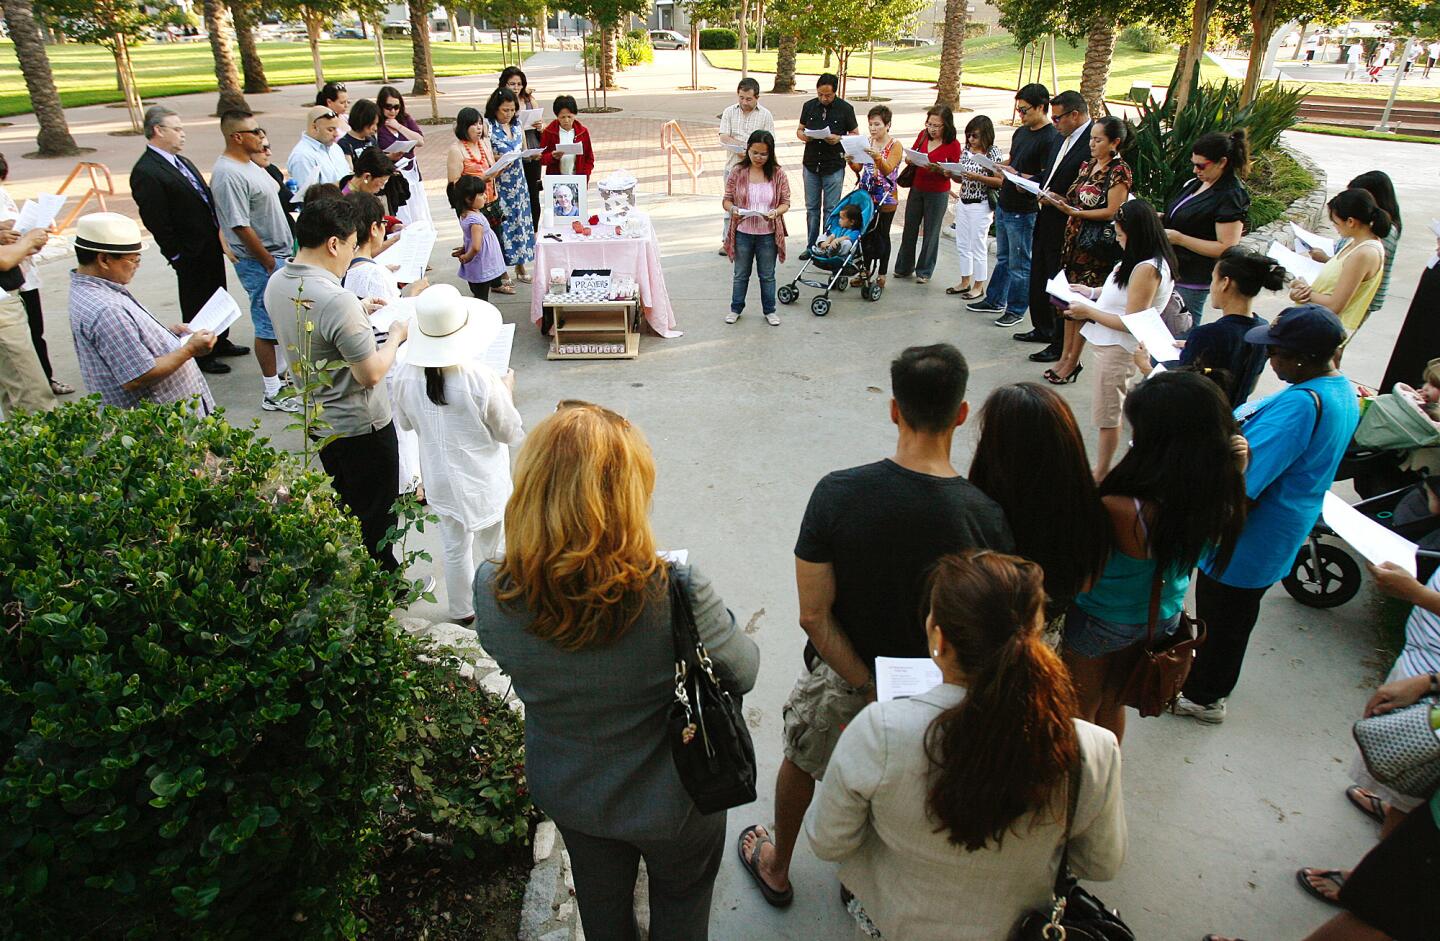 Attendees form a circle and recite a prayer at a prayer vigil for missing FBI agent Stephen Ivens at McCambridge Park in Burbank.